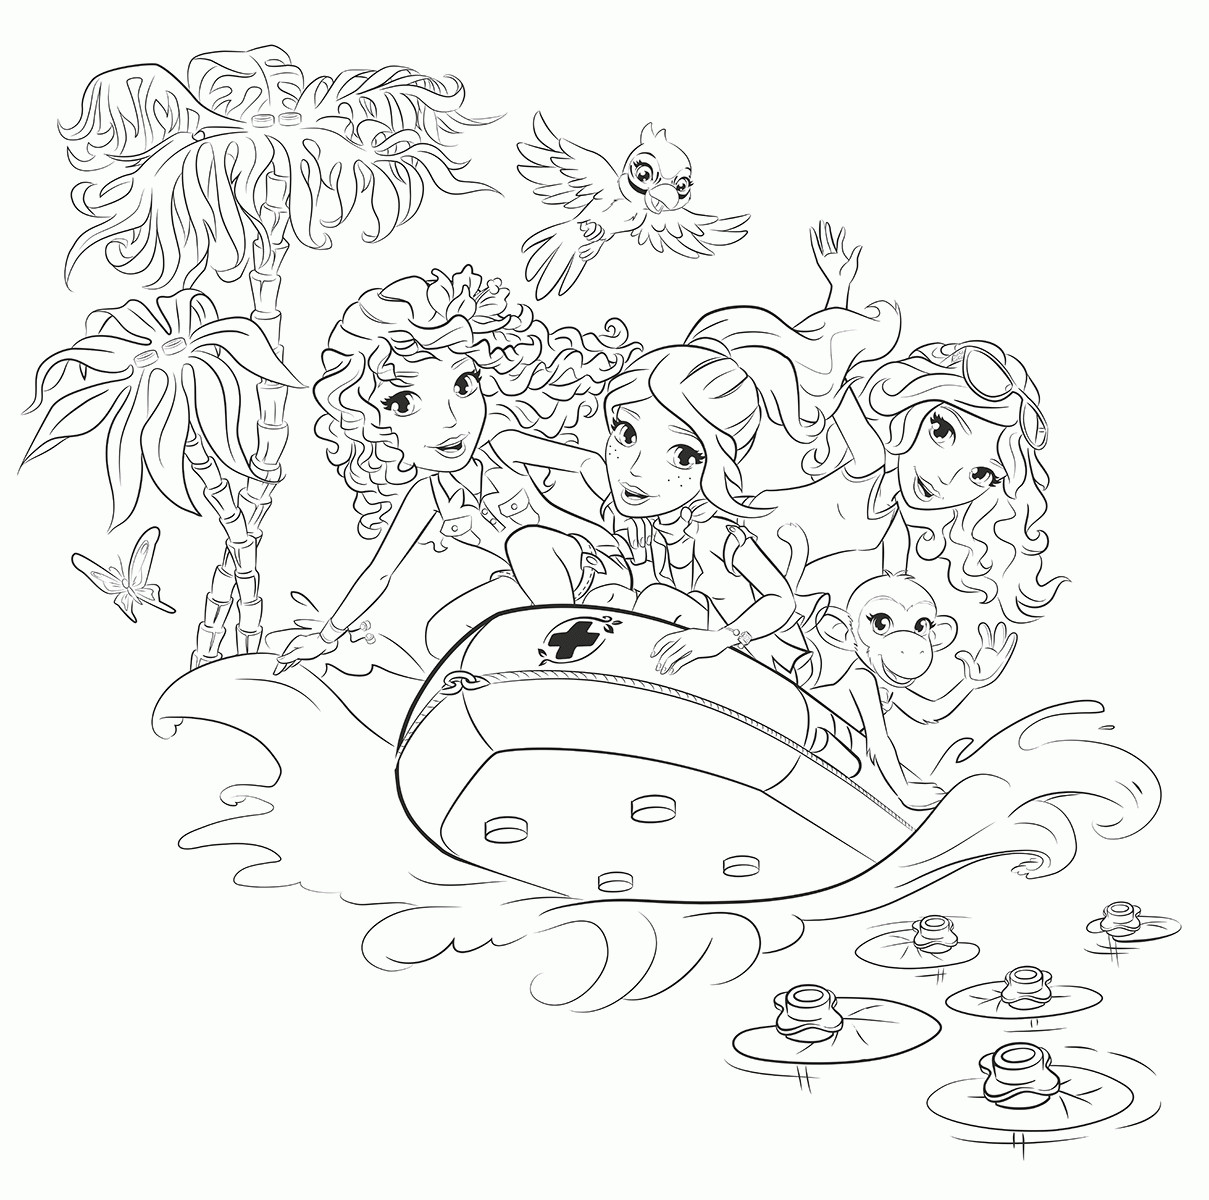 Girl Lego Coloring Pages
 Lego Friends Coloring Pages to and print for free